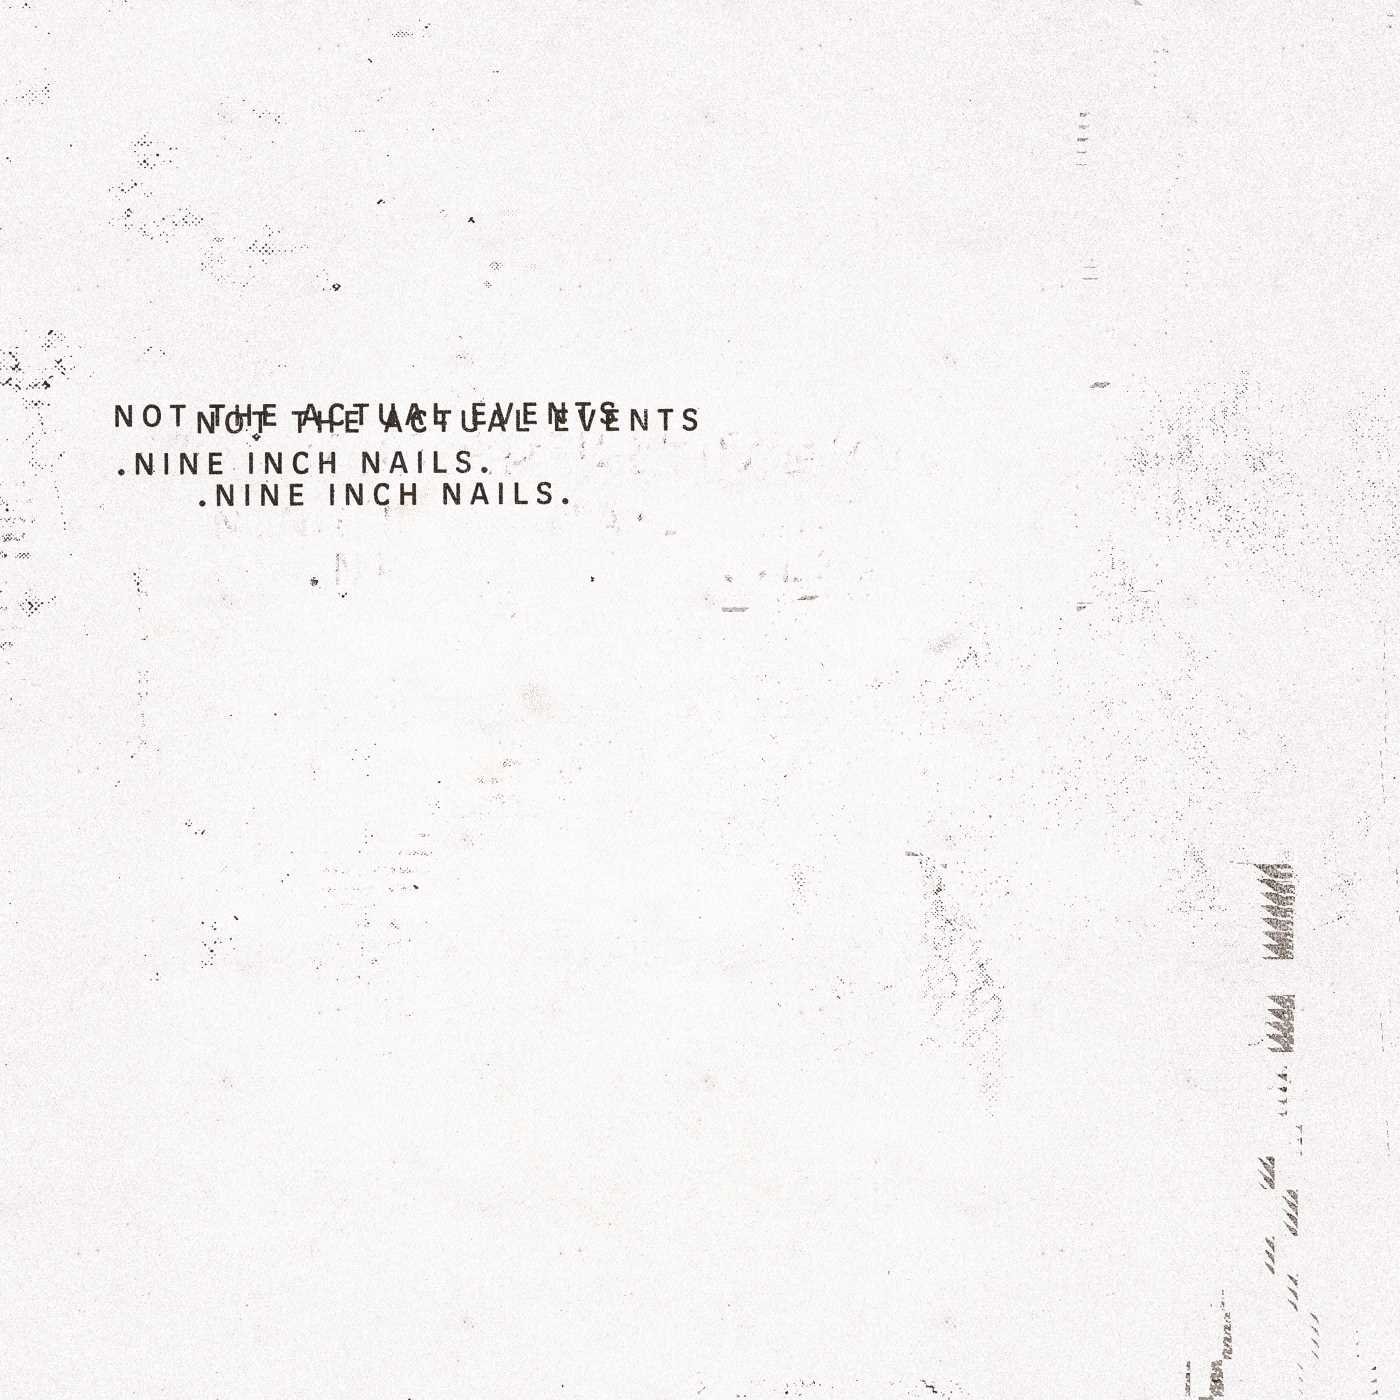 NINE INCH NAILS / ナイン・インチ・ネイルズ / NOT THE ACTUAL EVENTS